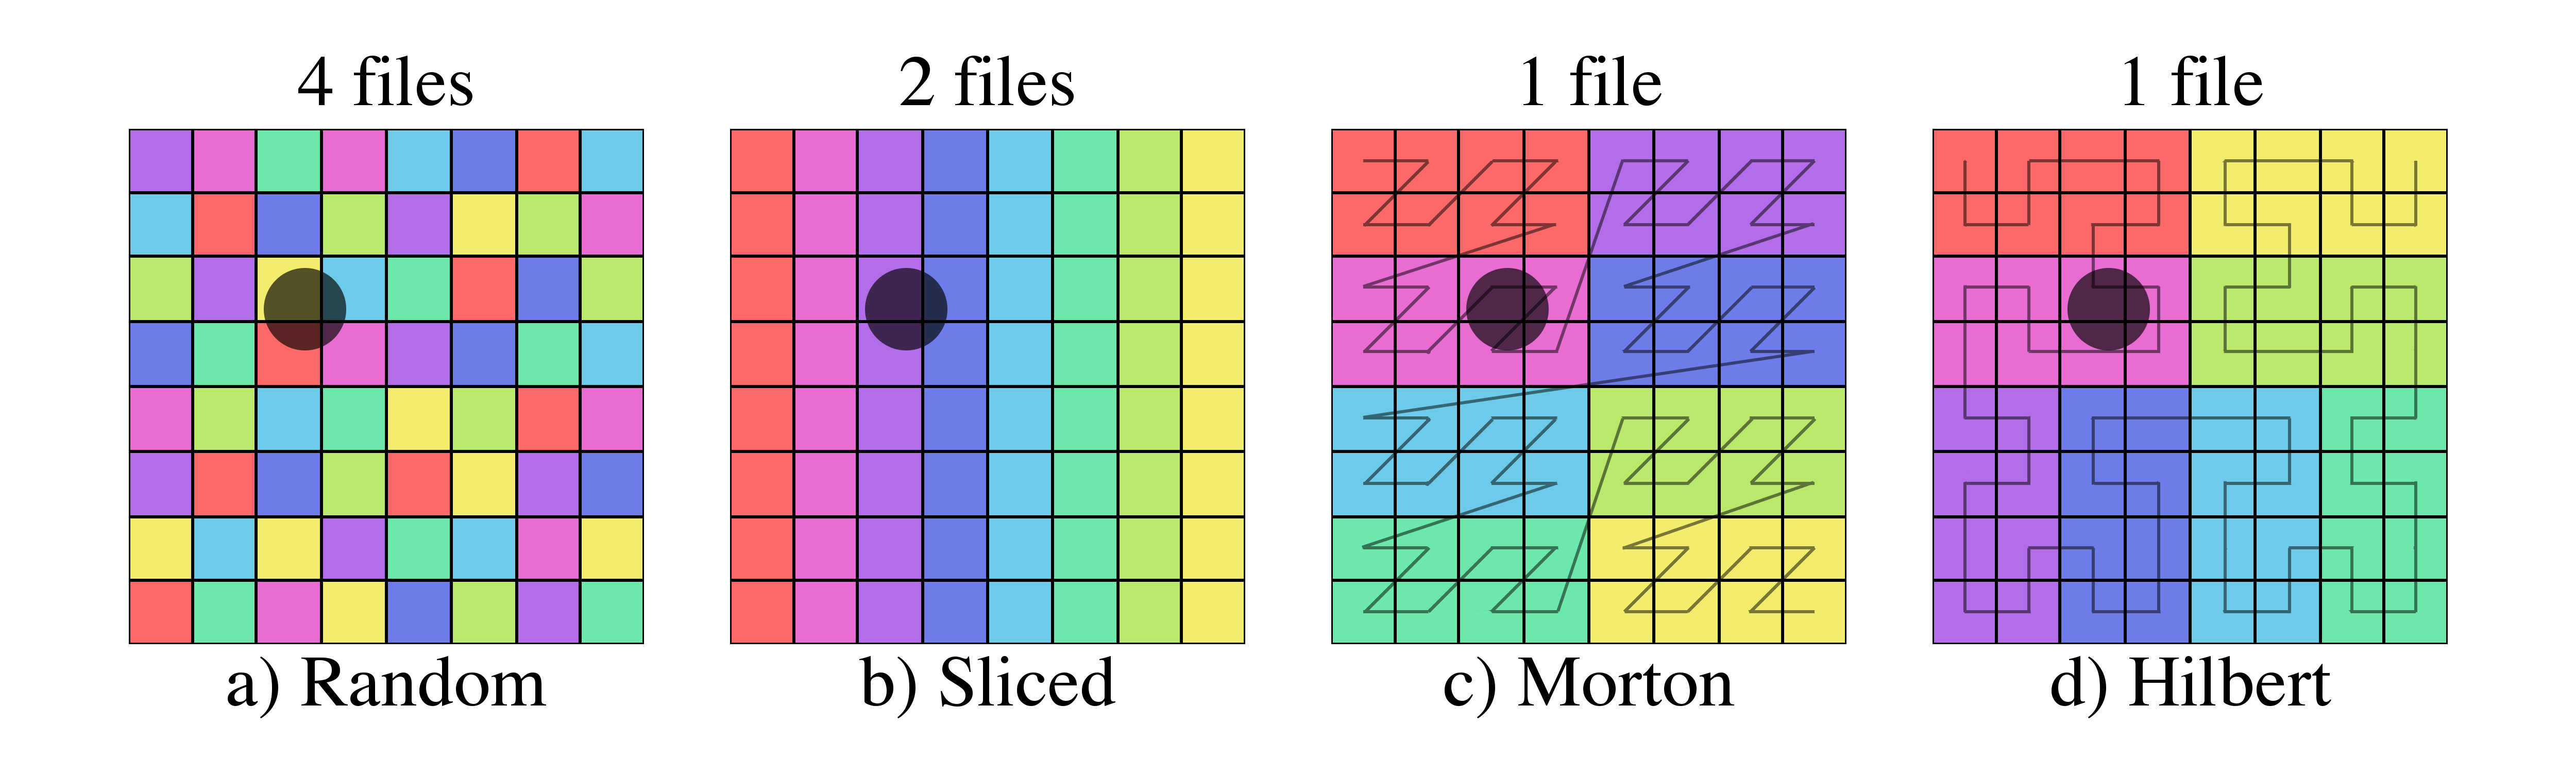 Figure 15: Examples of file selection for four different domain partitions and three different shaded selectors. The number of files above each images is the number of files that must be loaded in order to get all of the data within the selected region.